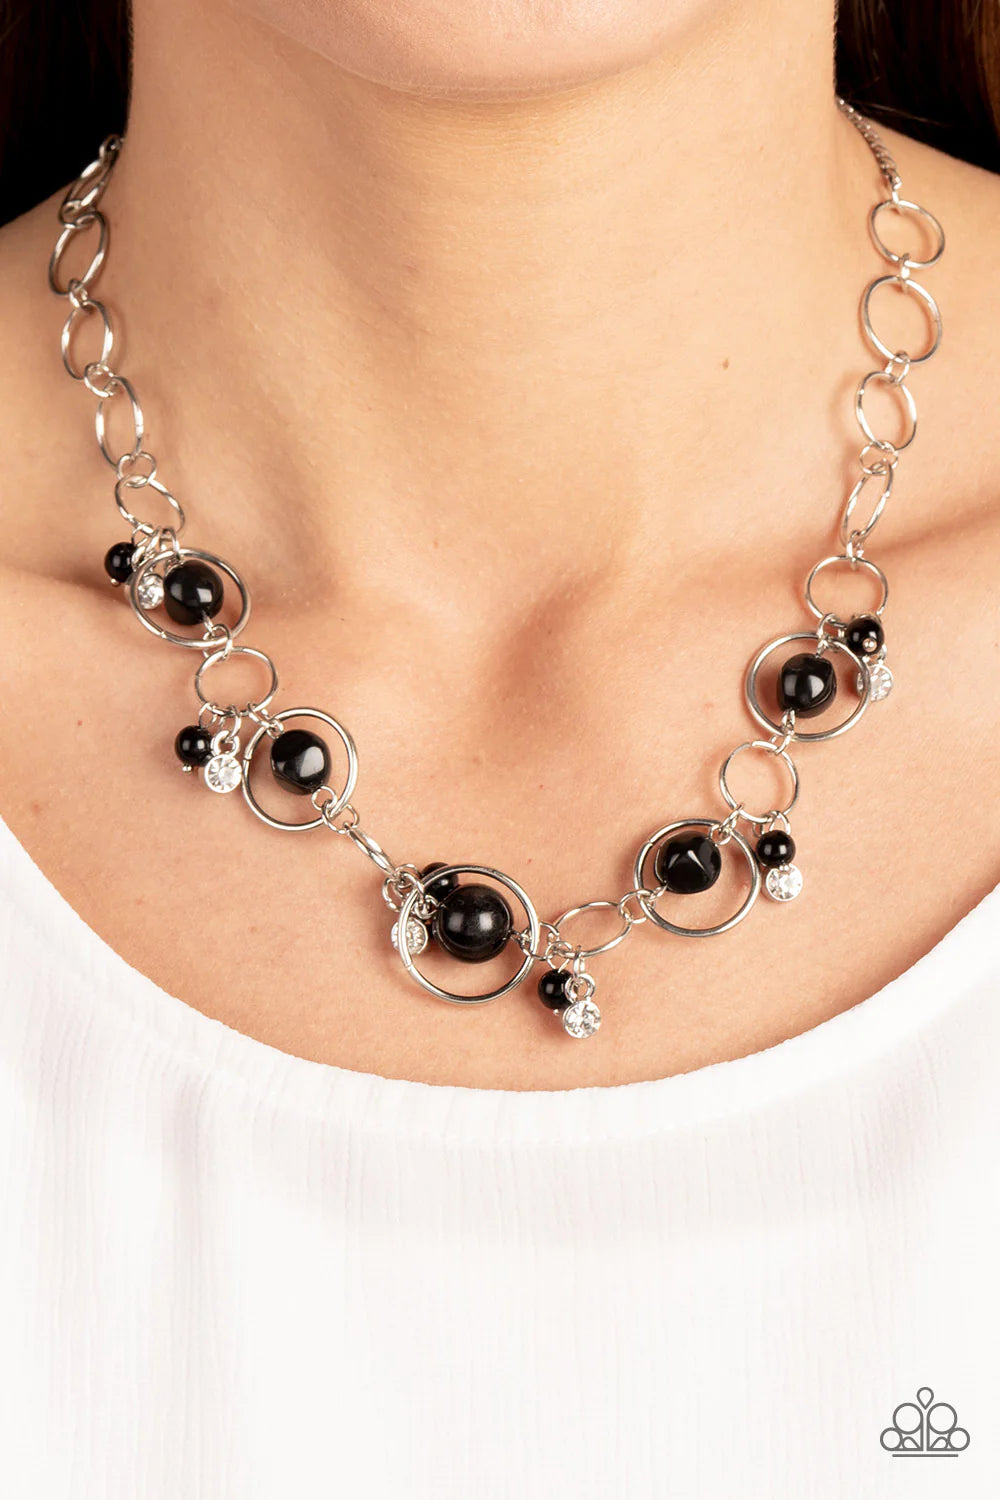 Paparazzi Necklaces - Think of the Posh-ibilities! - Black